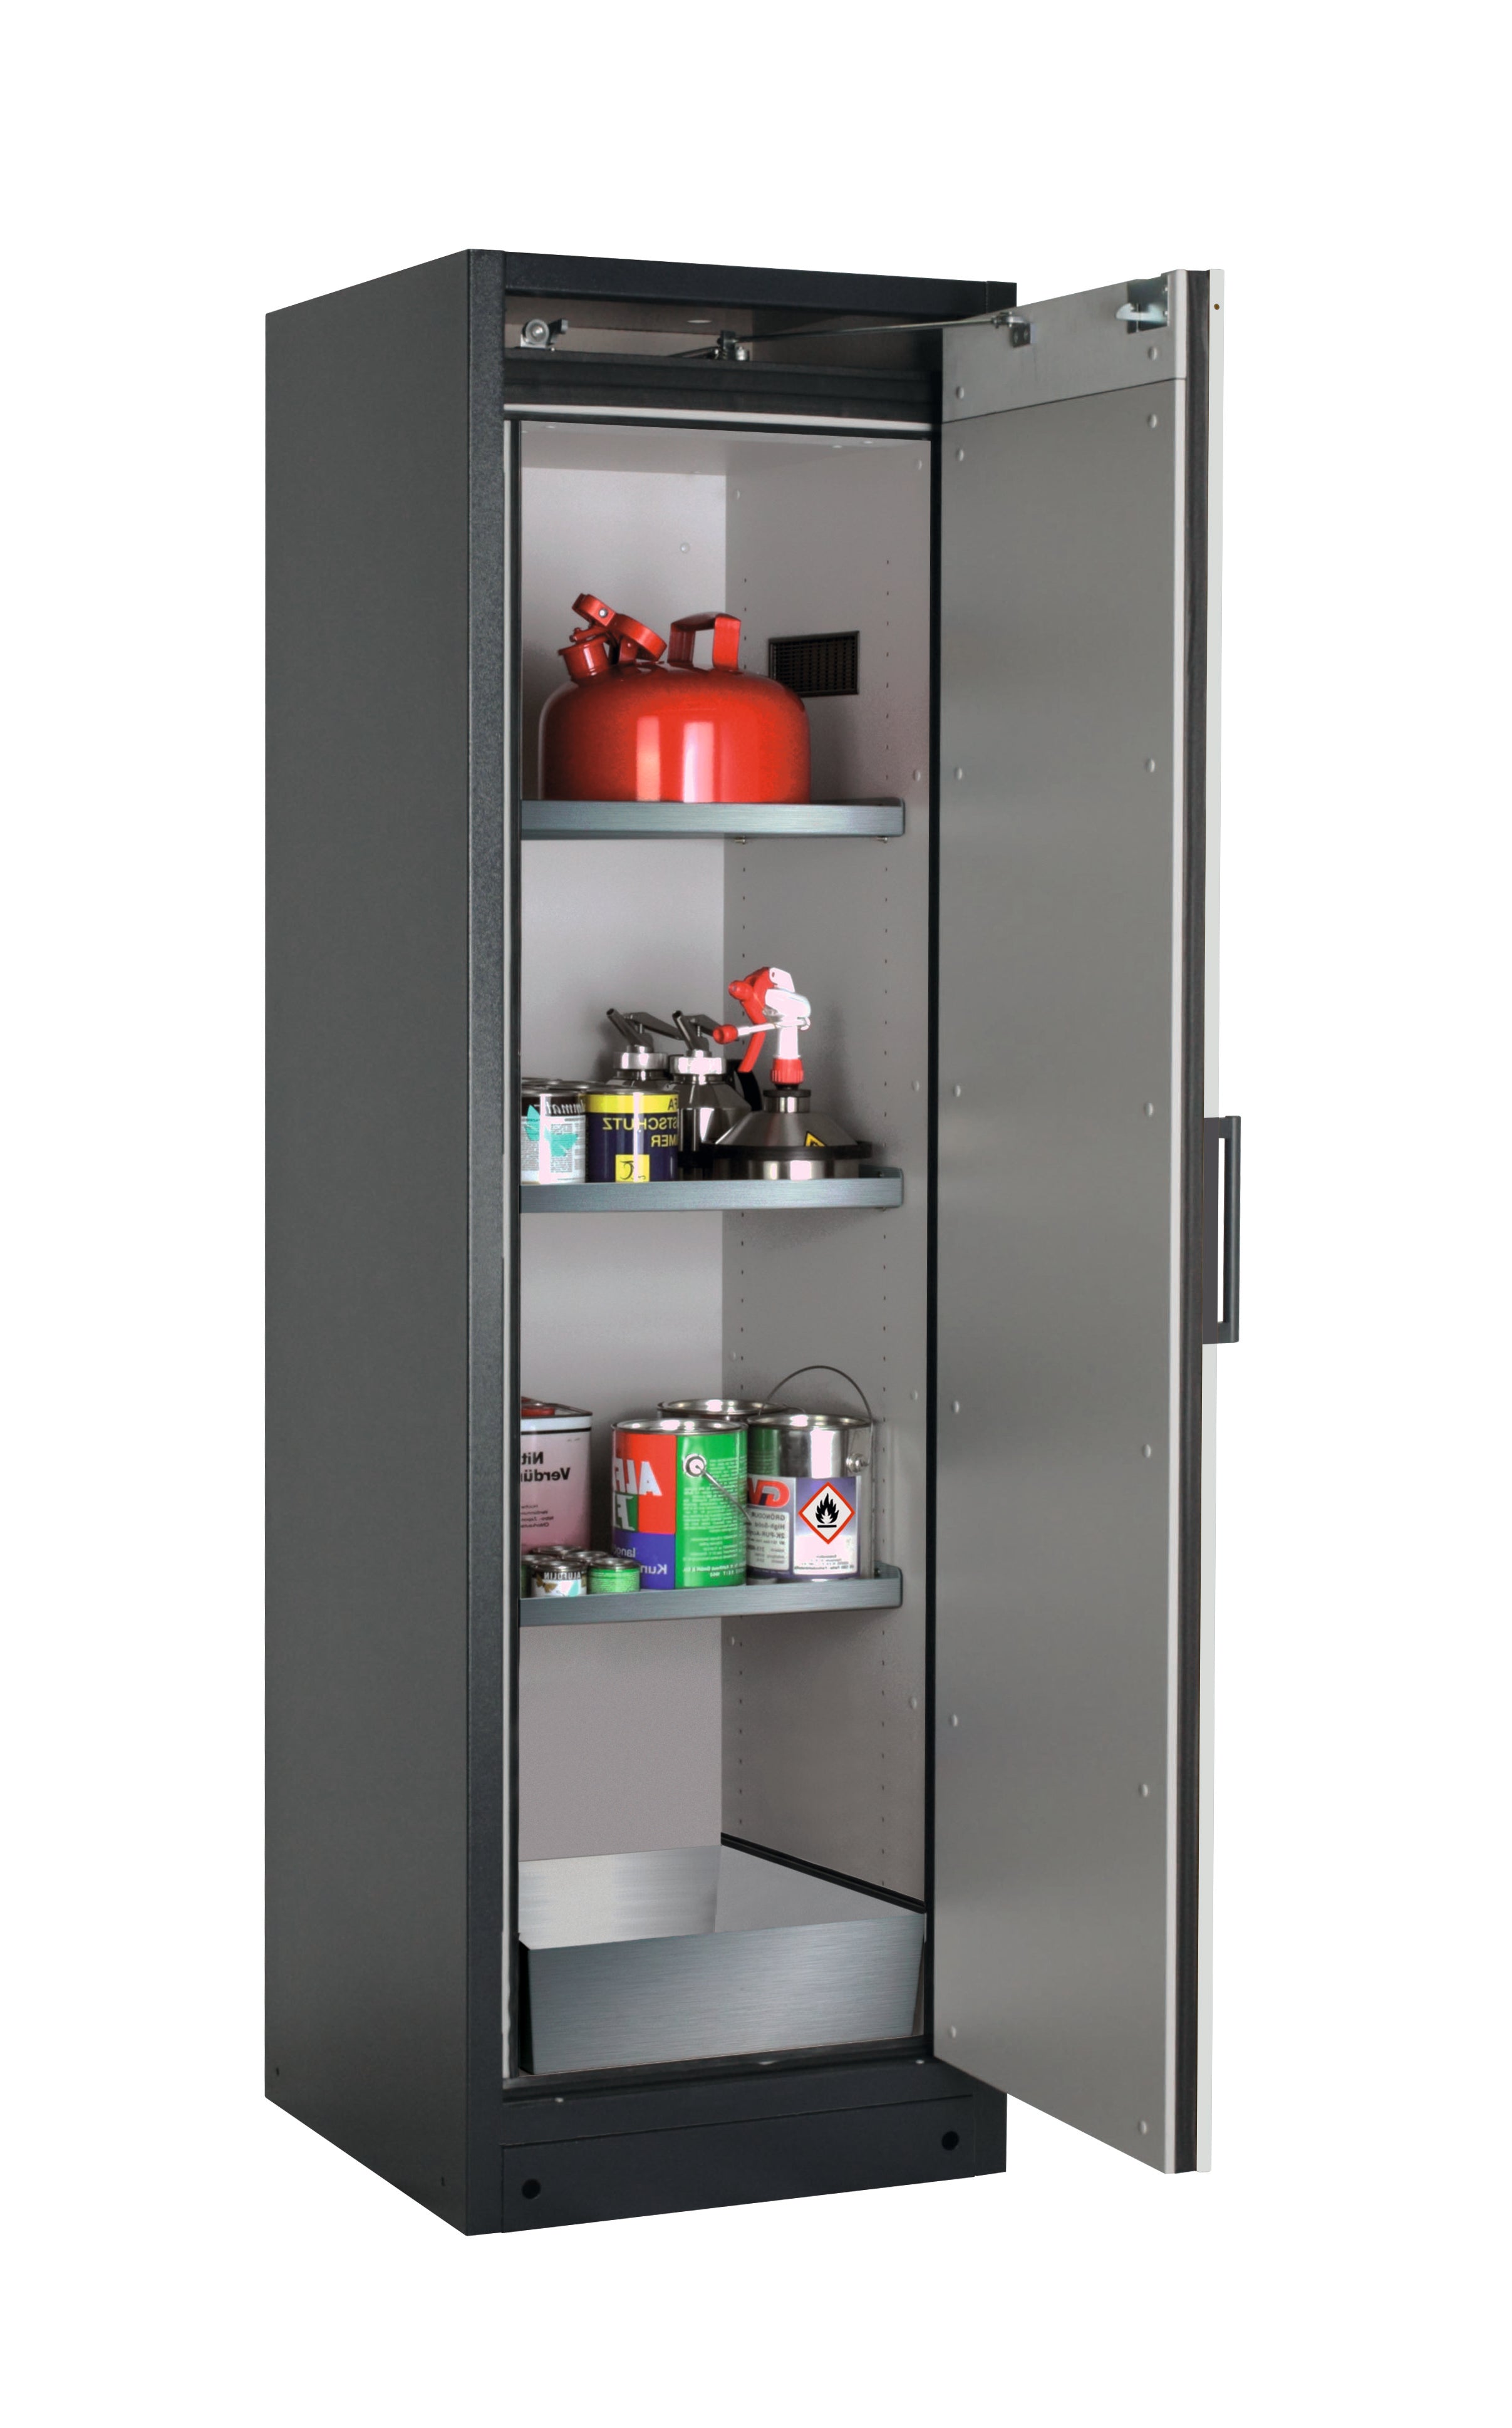 Type 90 safety storage cabinet Q-CLASSIC-90 model Q90.195.060.R in light grey RAL 7035 with 3x shelf standard (stainless steel 1.4301),